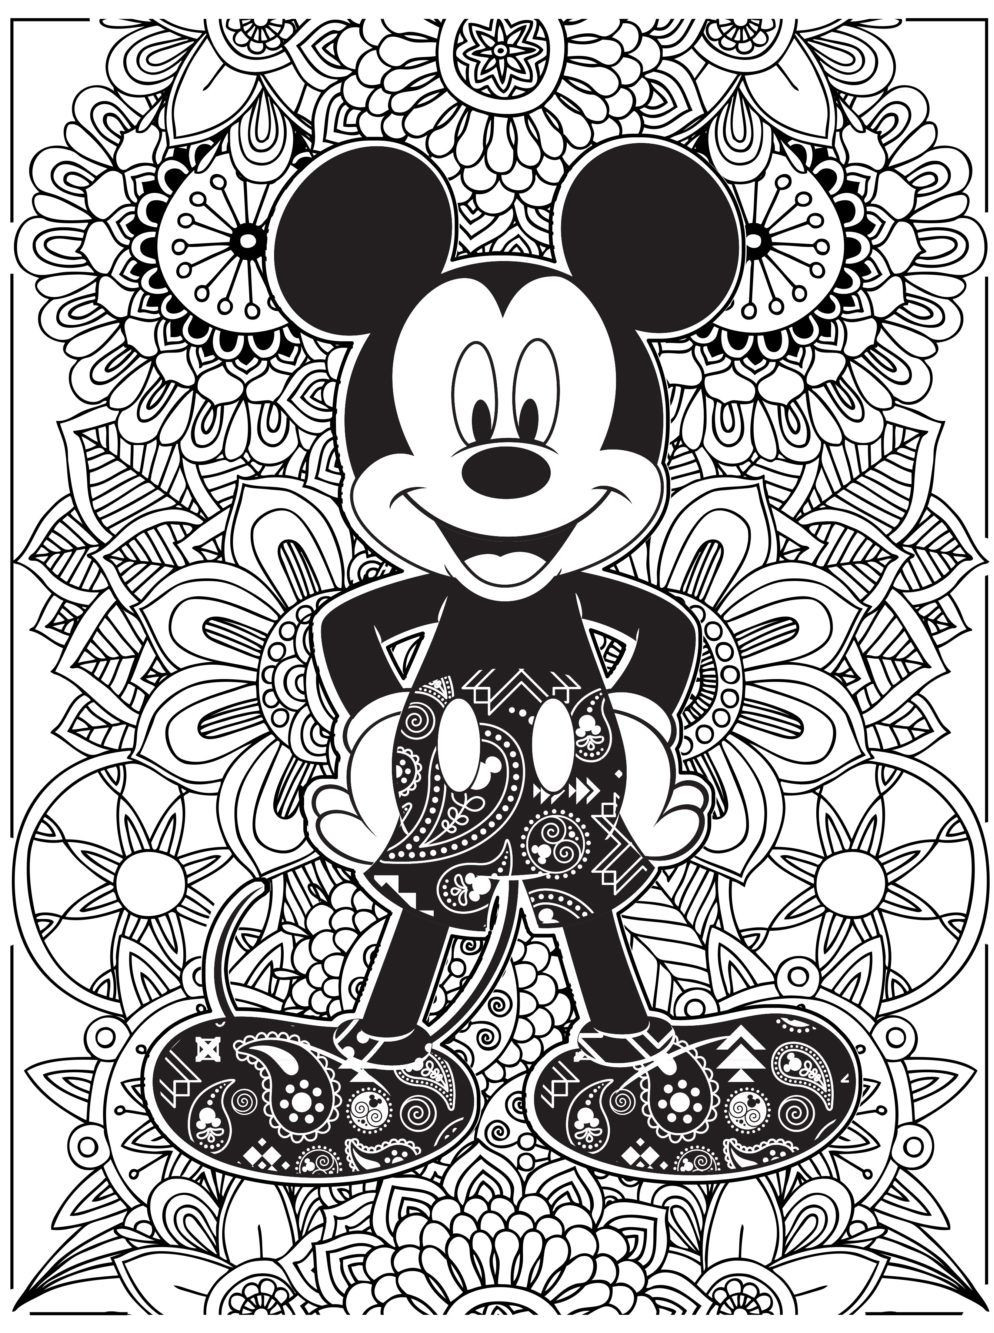 disney mickey mouse fun difficult coloring